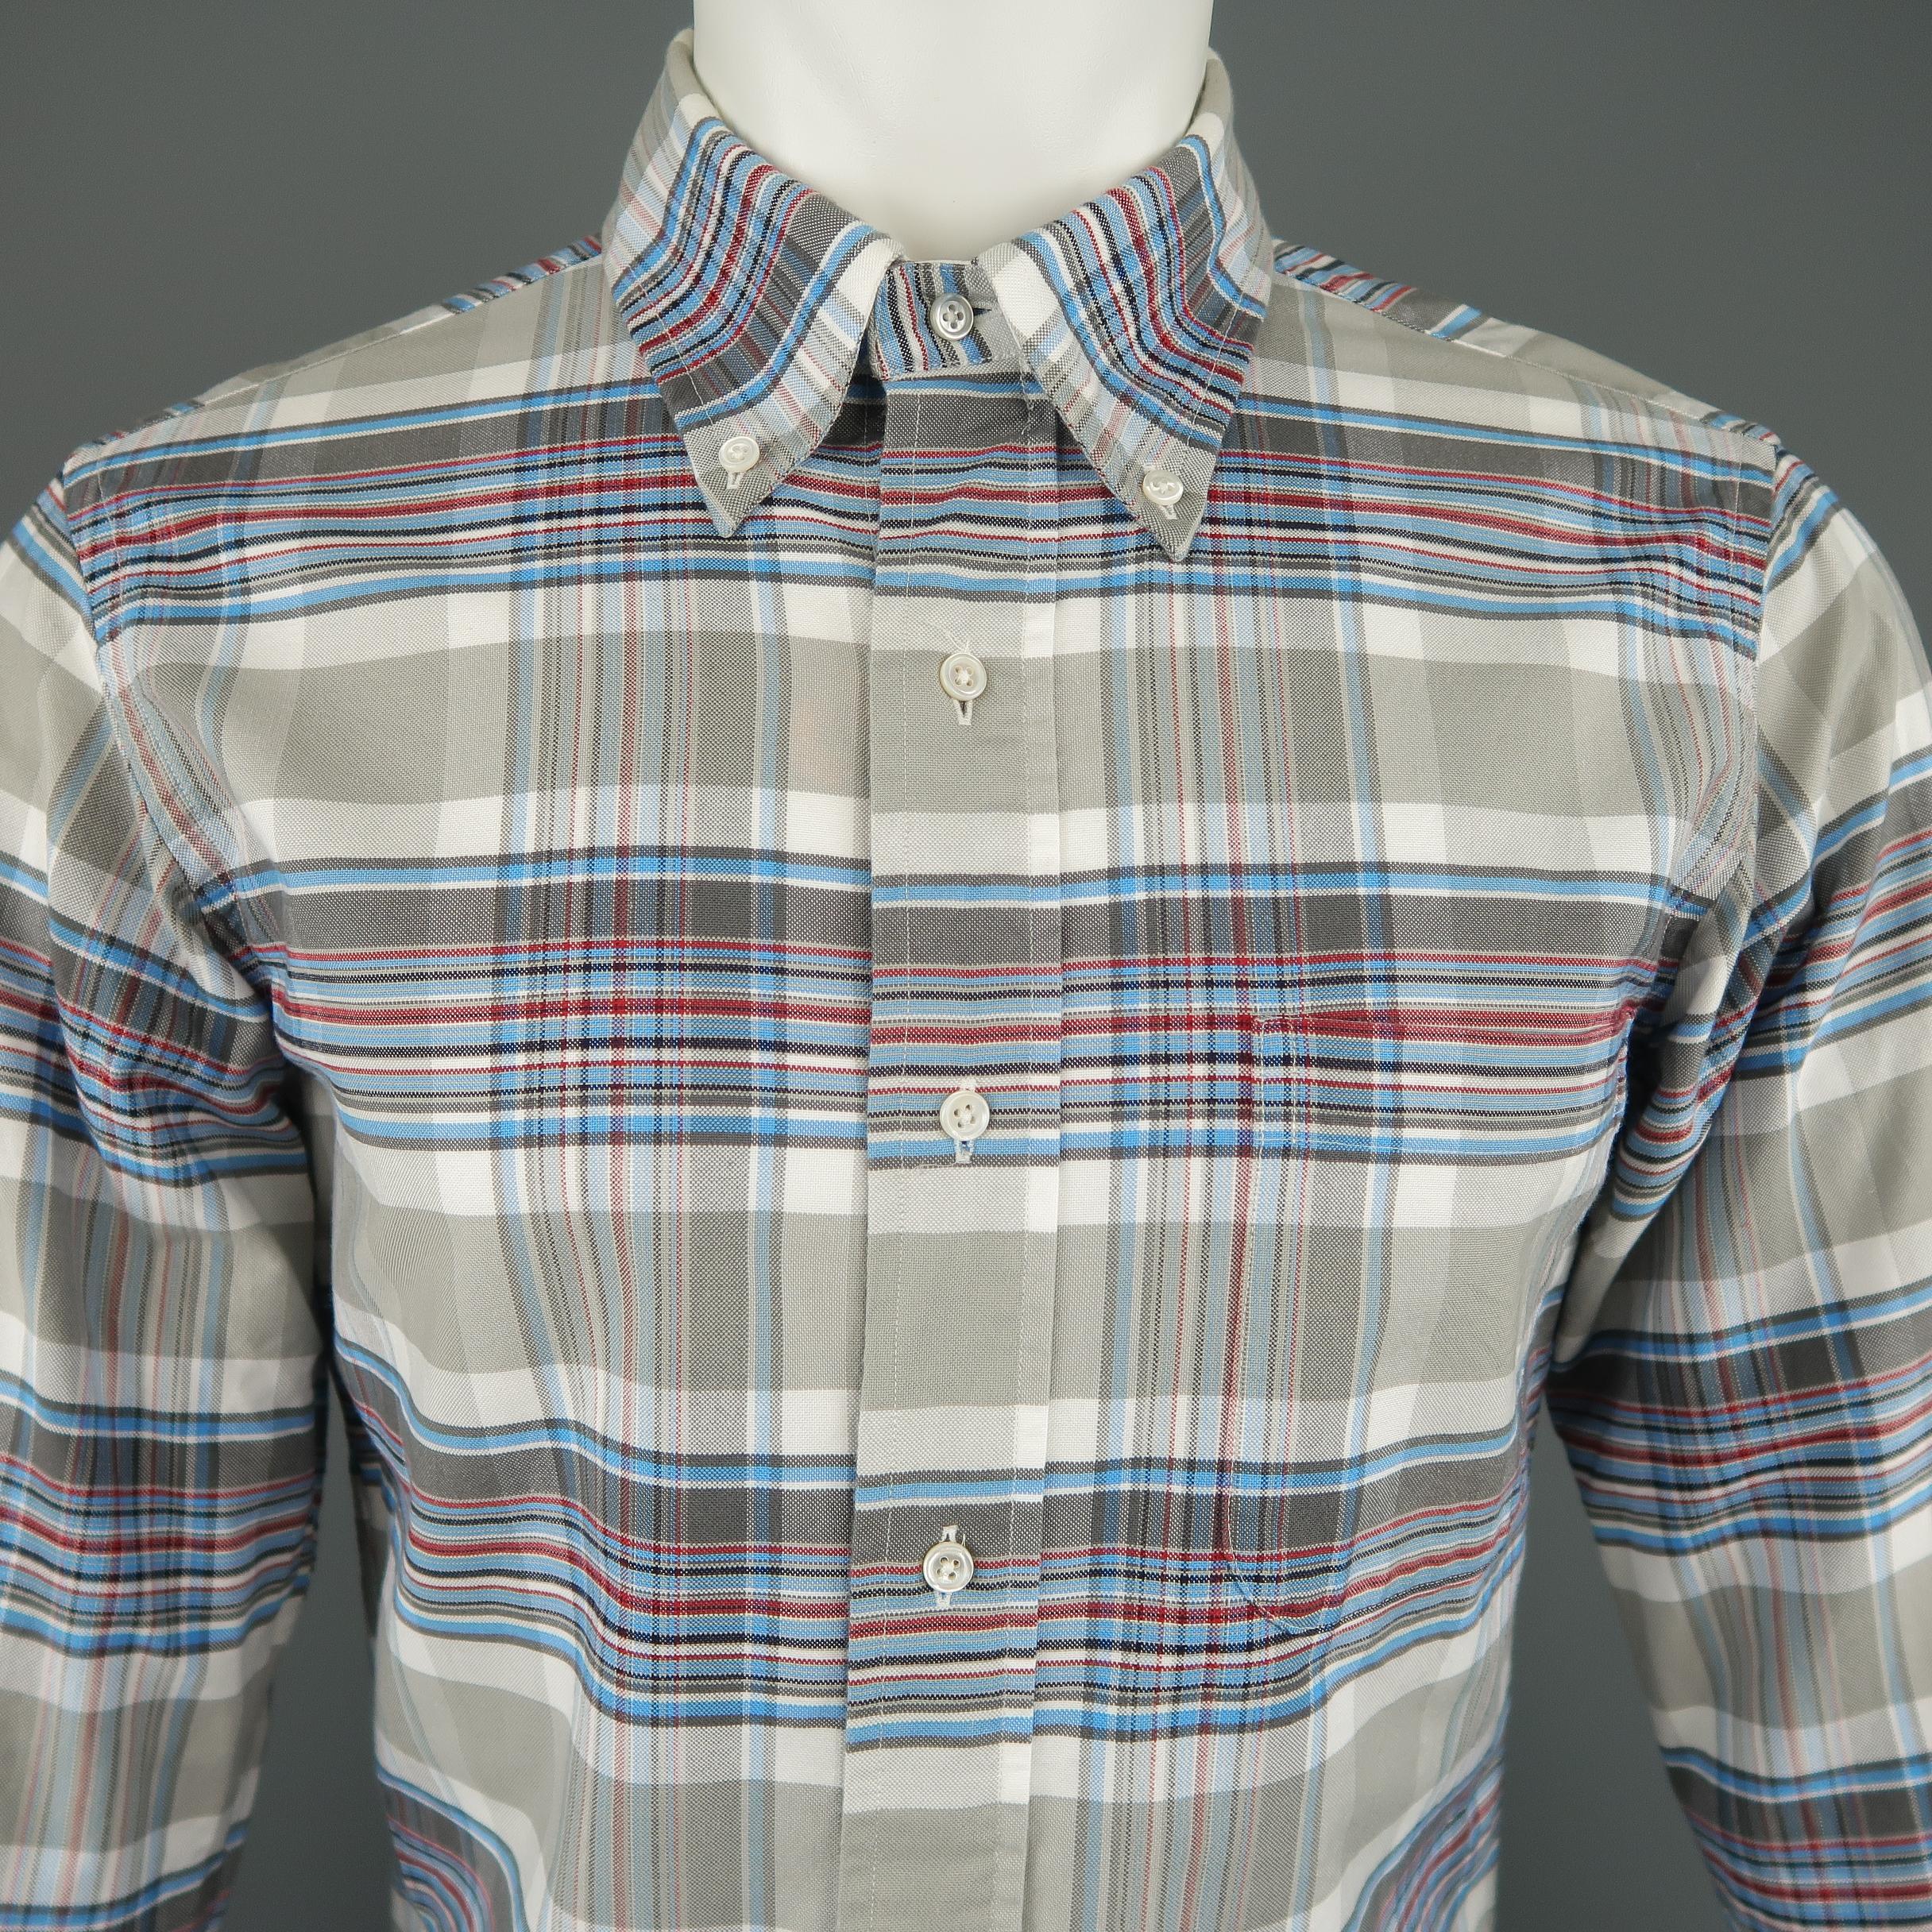 BLACK FLEECE shirt comes in white cotton with gray, red, and blue plaid pattern throughout, button down collar, curved hem, and patch pocket. Made in USA. Retail price $225,00. 
 
Excellent Pre-Owned Condition.
Marked: BB0
 
Measurements:
